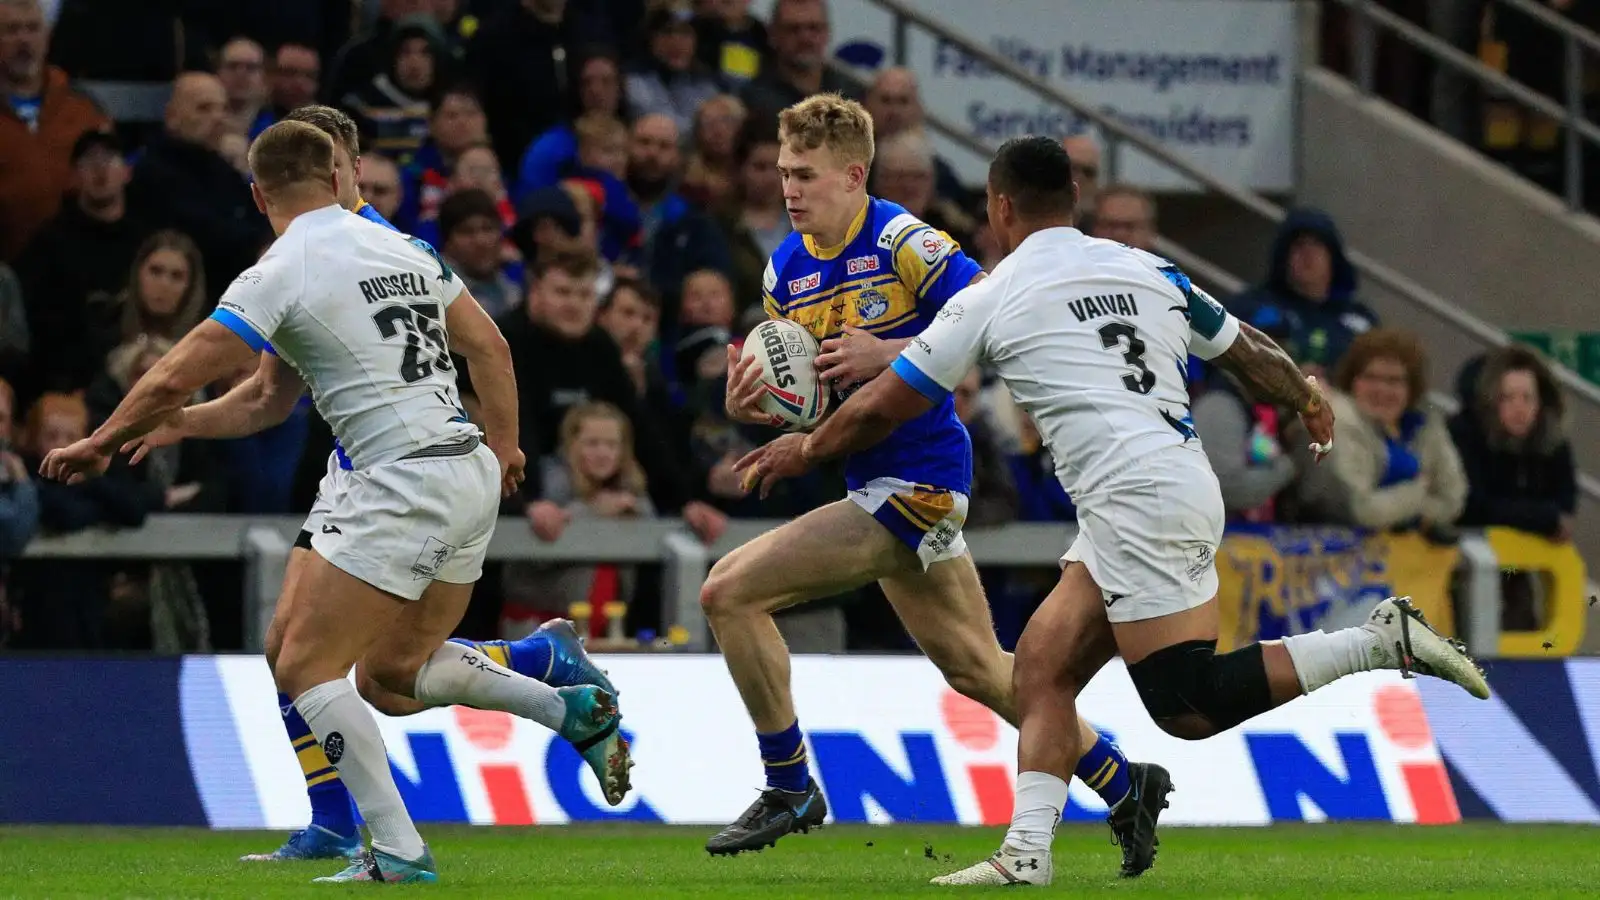 Leeds Rhinos starlet commits long-term future to the club: ‘He is an exciting, young prospect’